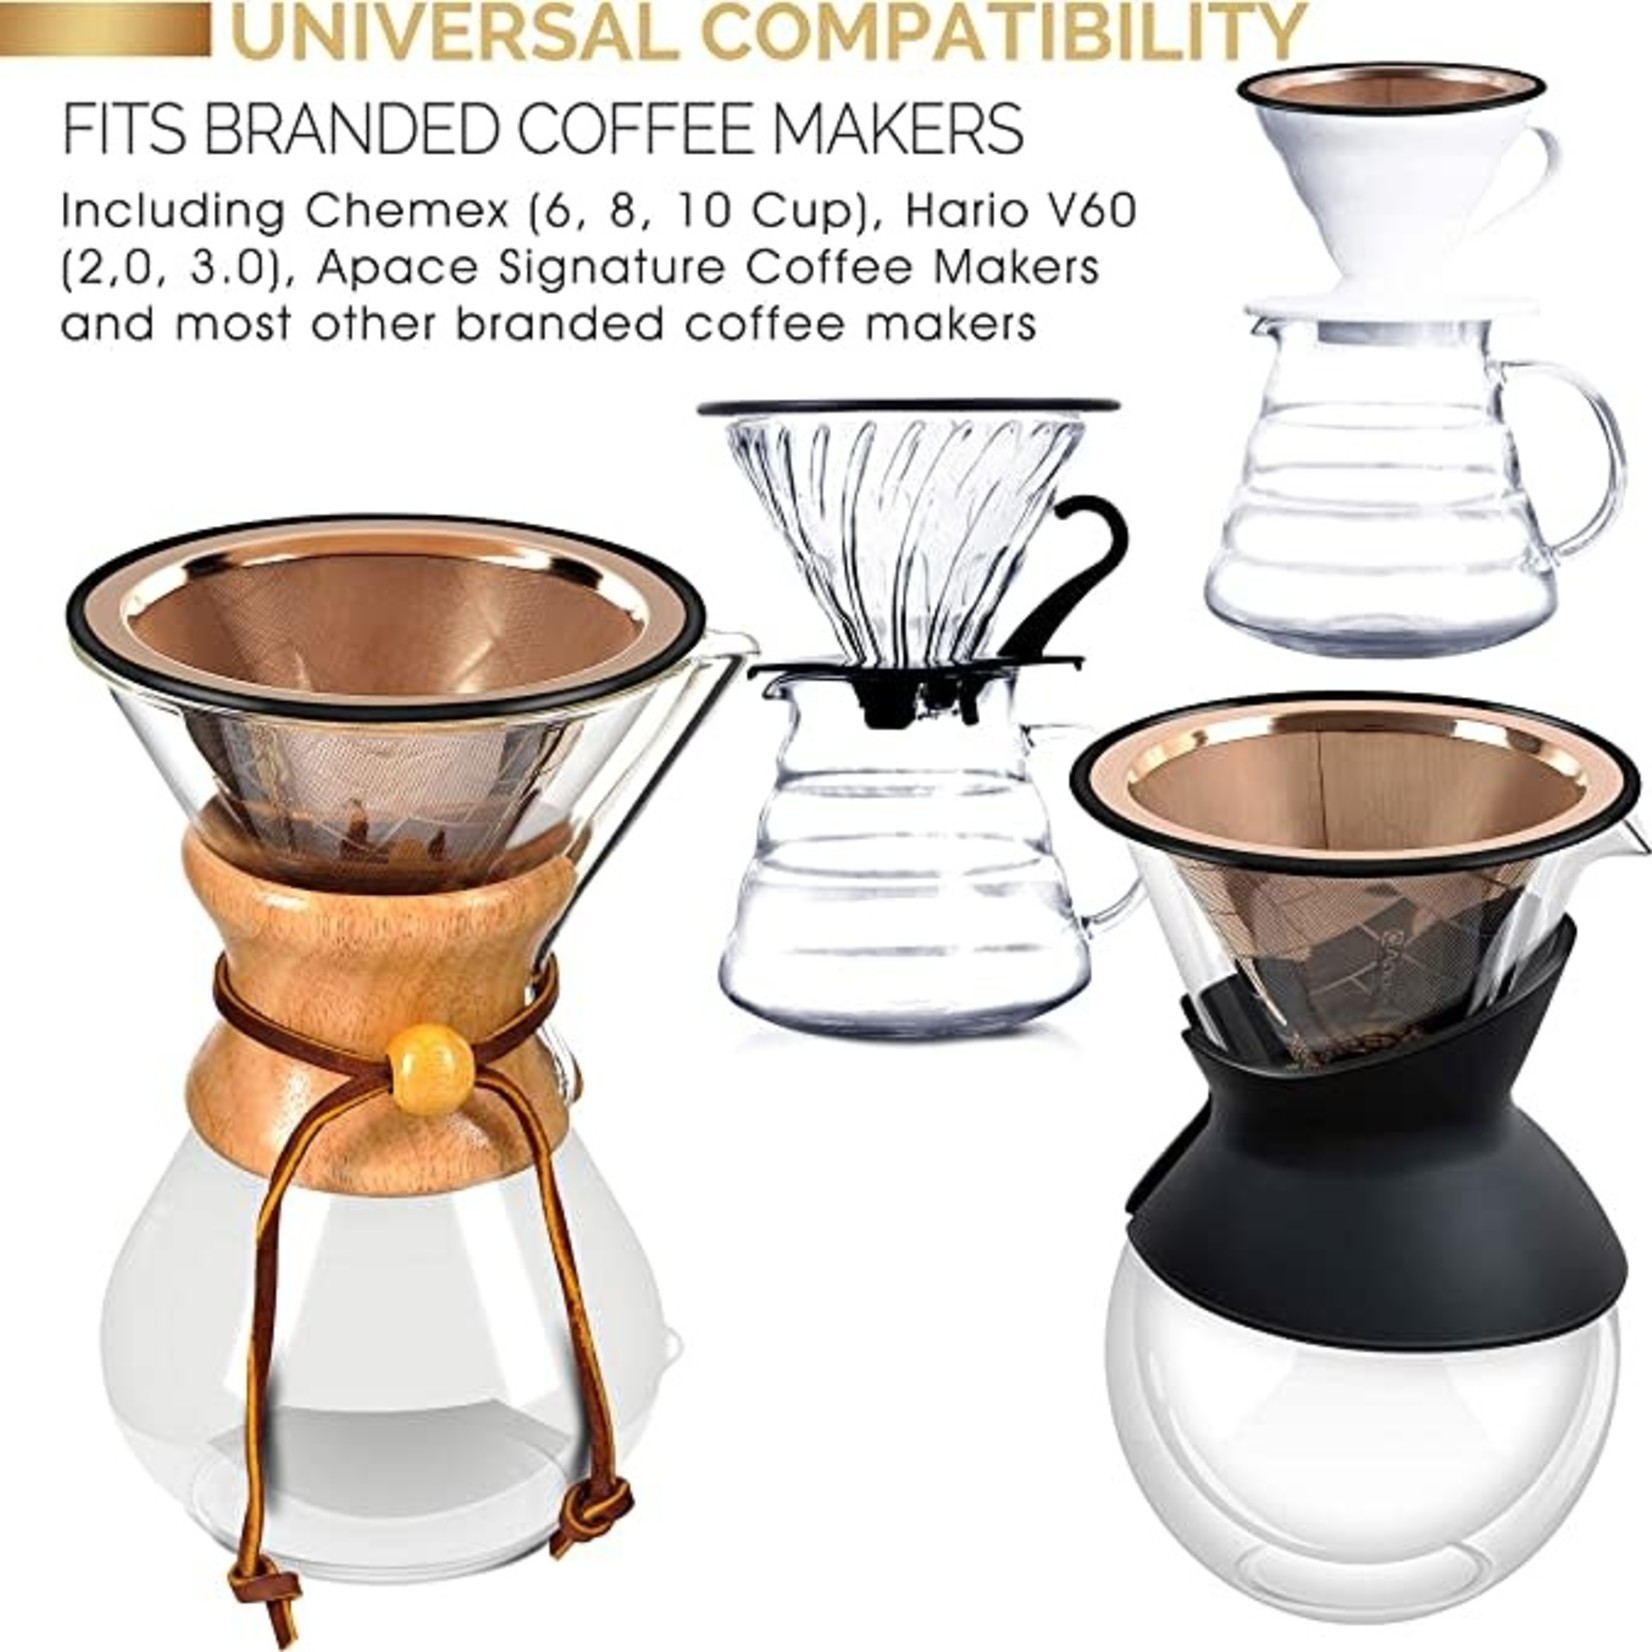 Paperless Coffee Filter- Stainless Steel- Titanium Copper